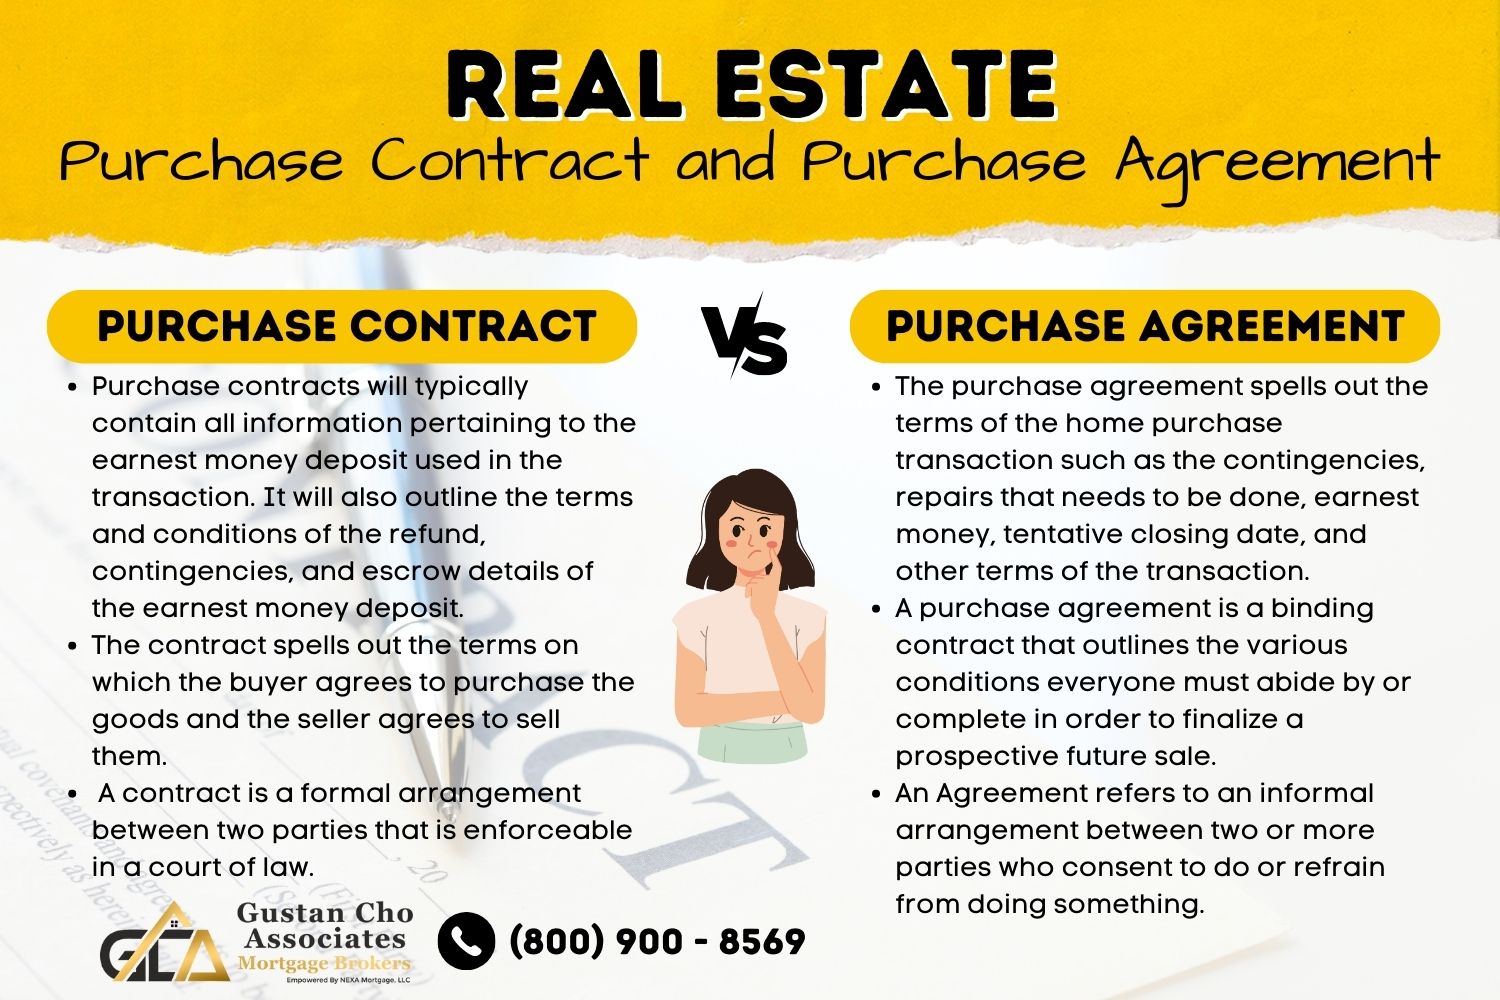 Real Estate Purchase Contract and Purchase Agreement